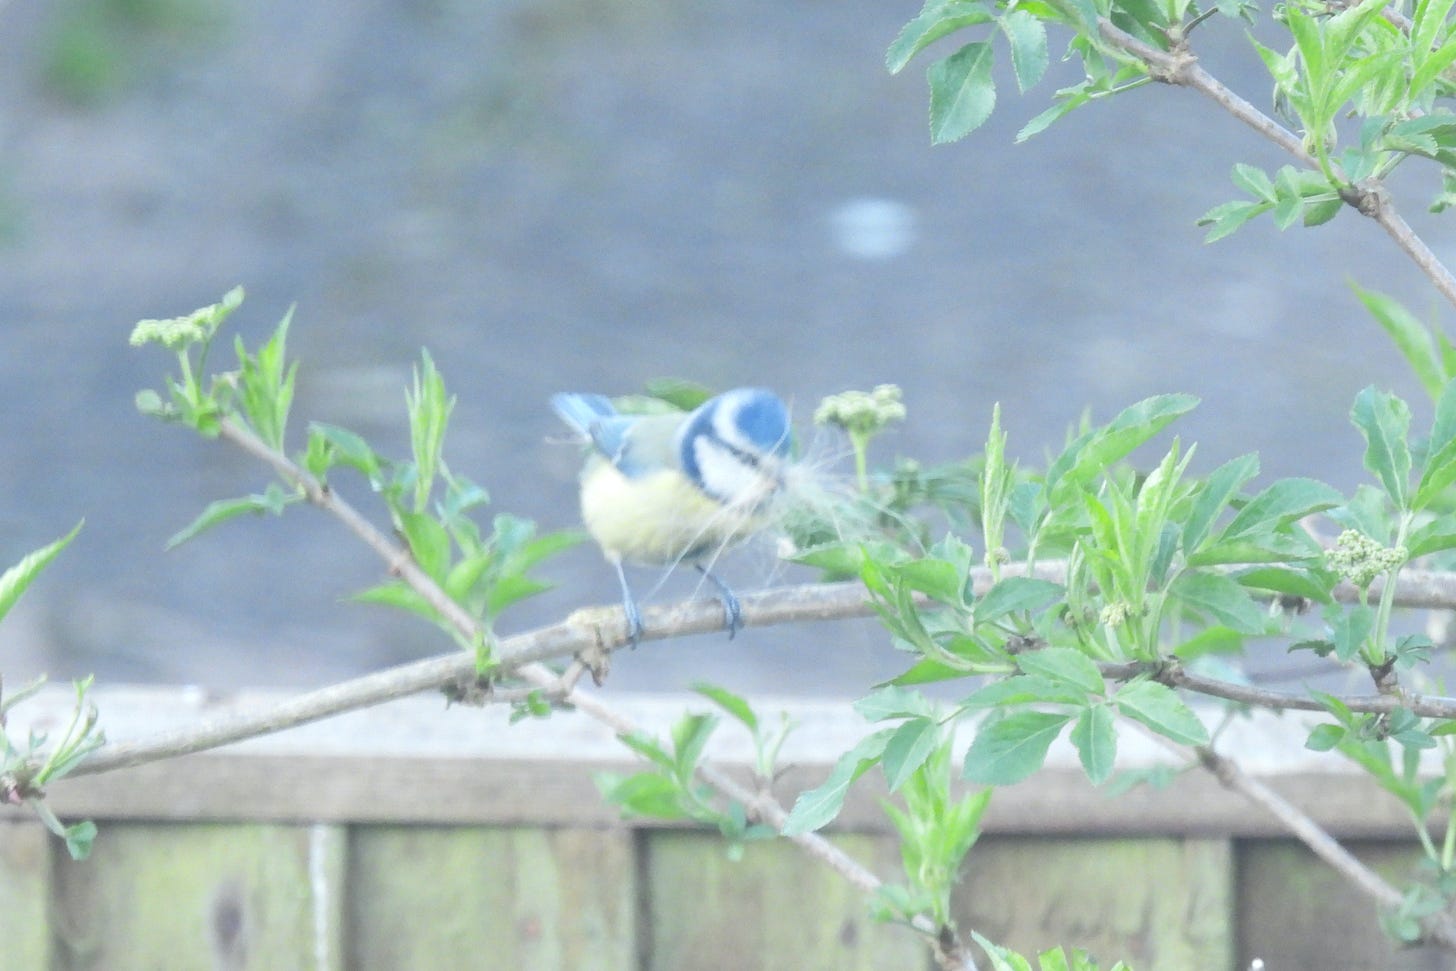 Blue Tit on branch carrying a bunch of hair or fur in its bill